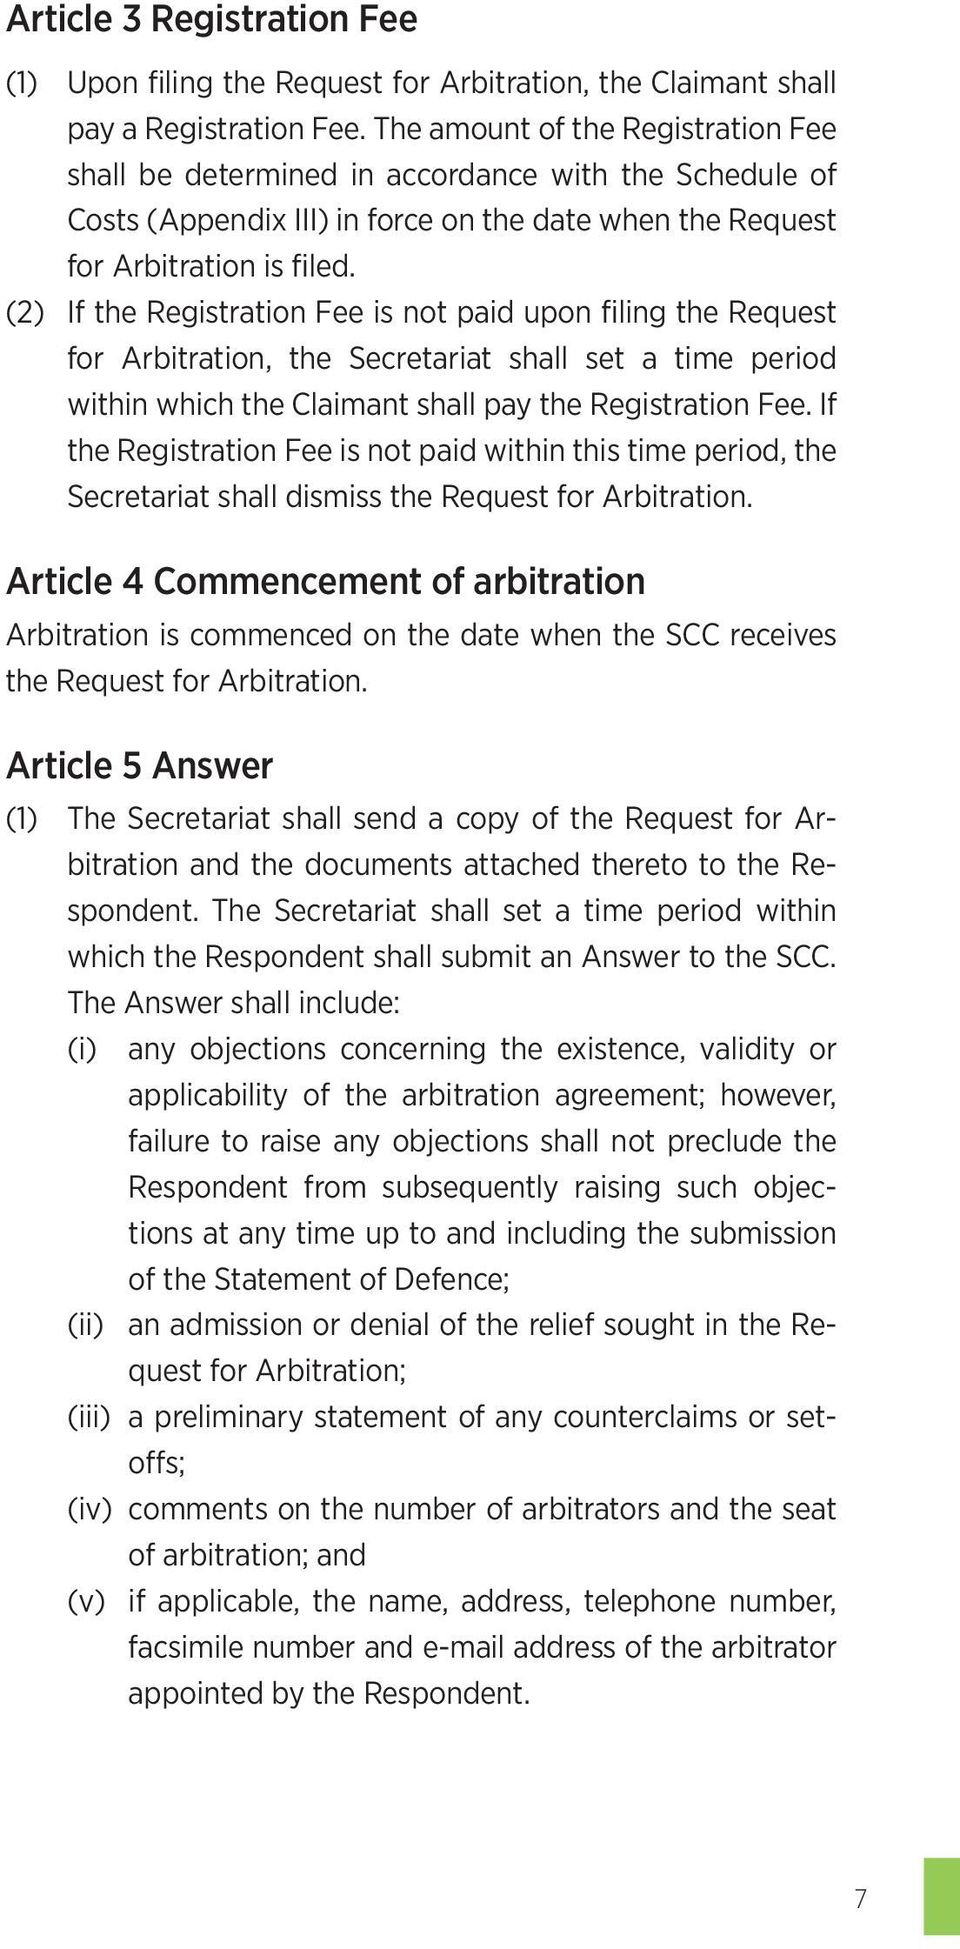 (2) If the Registration Fee is not paid upon filing the Request for Arbitration, the Secretariat shall set a time period within which the Claimant shall pay the Registration Fee.